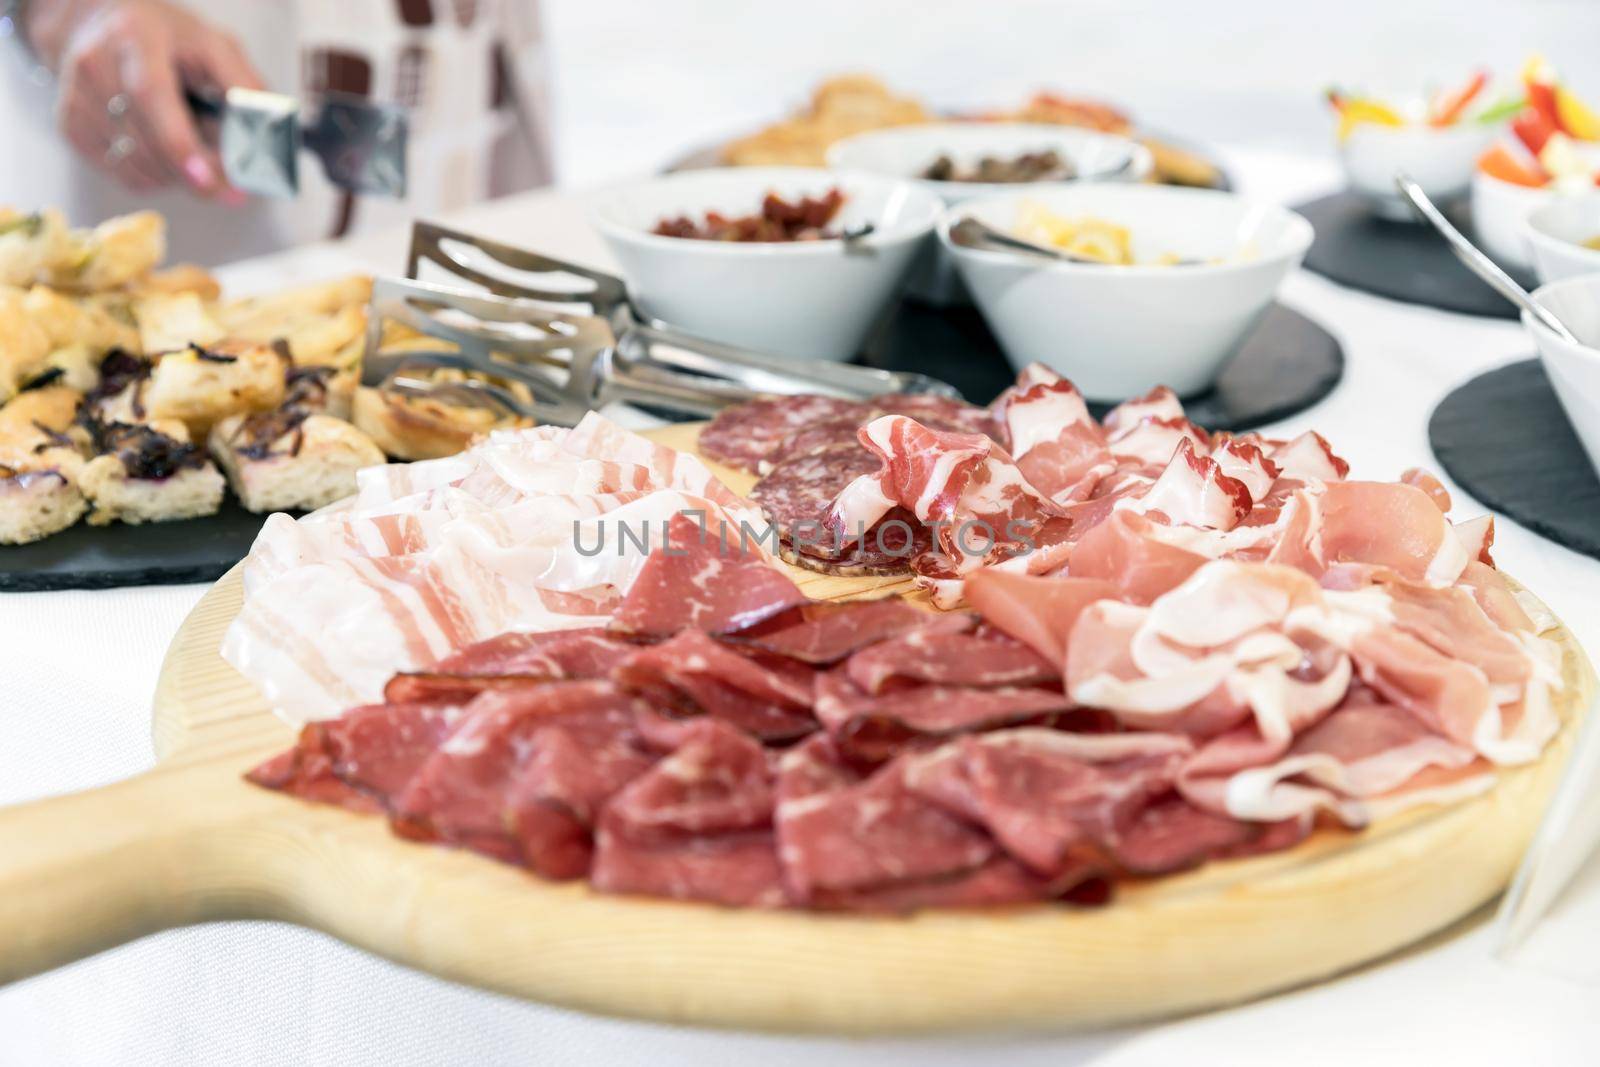 Wood cutting board with prosciutto, bacon, salami and bresaola. Meat platter.